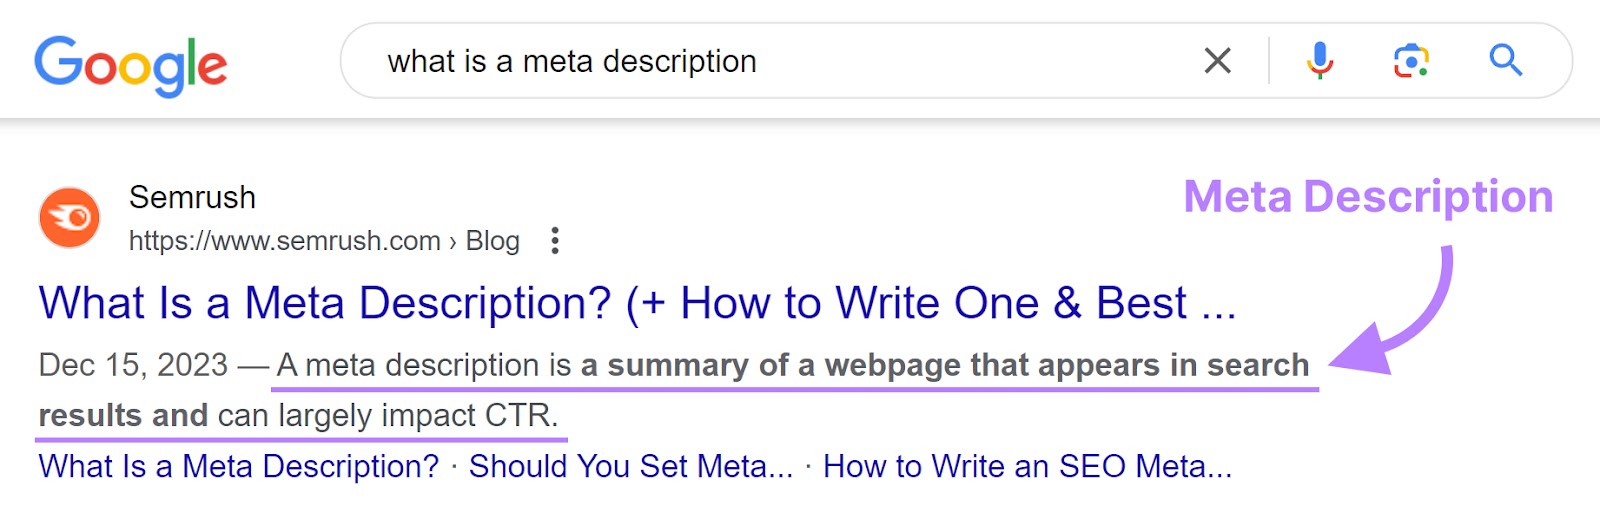 Meta description shown in the top result of a Google Search Engine Results Page.